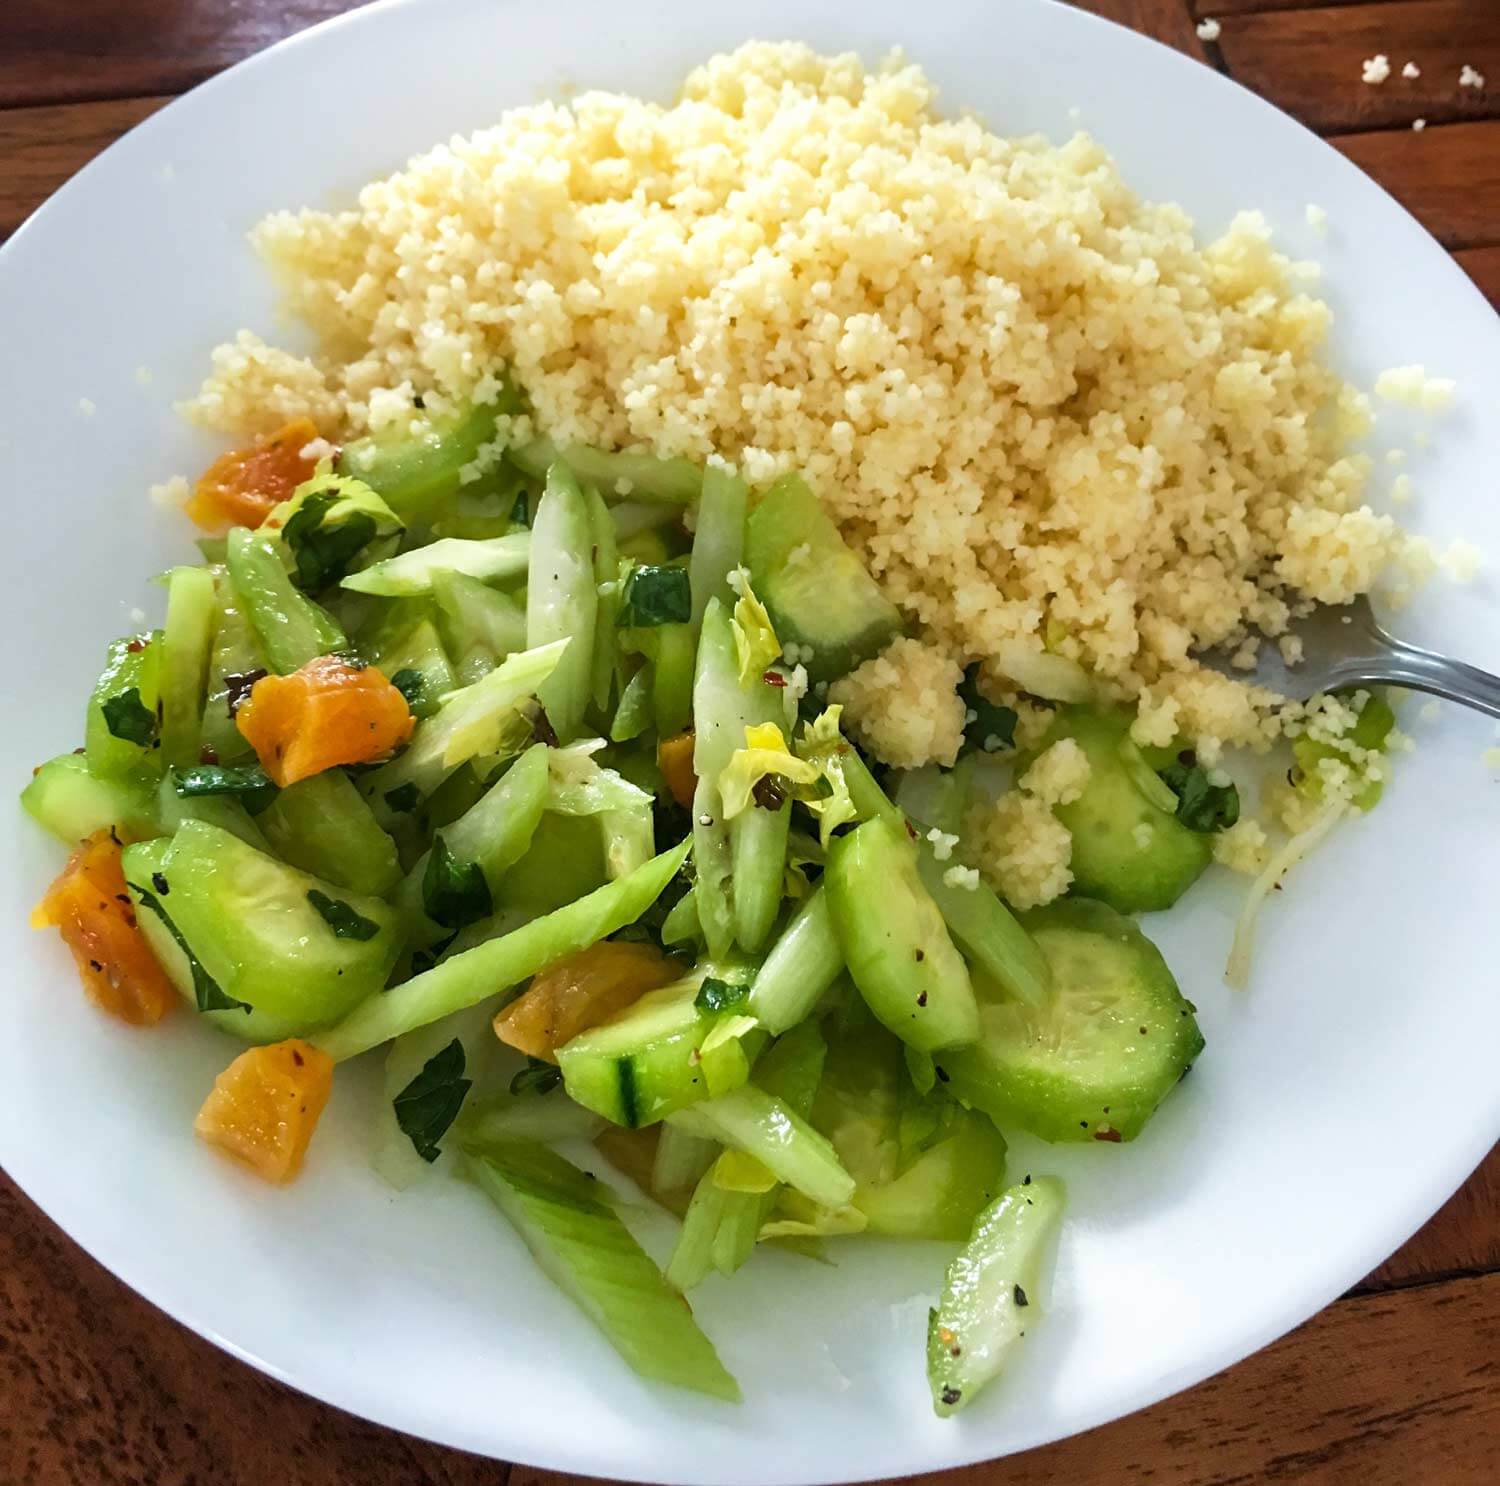 dinner of veggies and couscous on plate